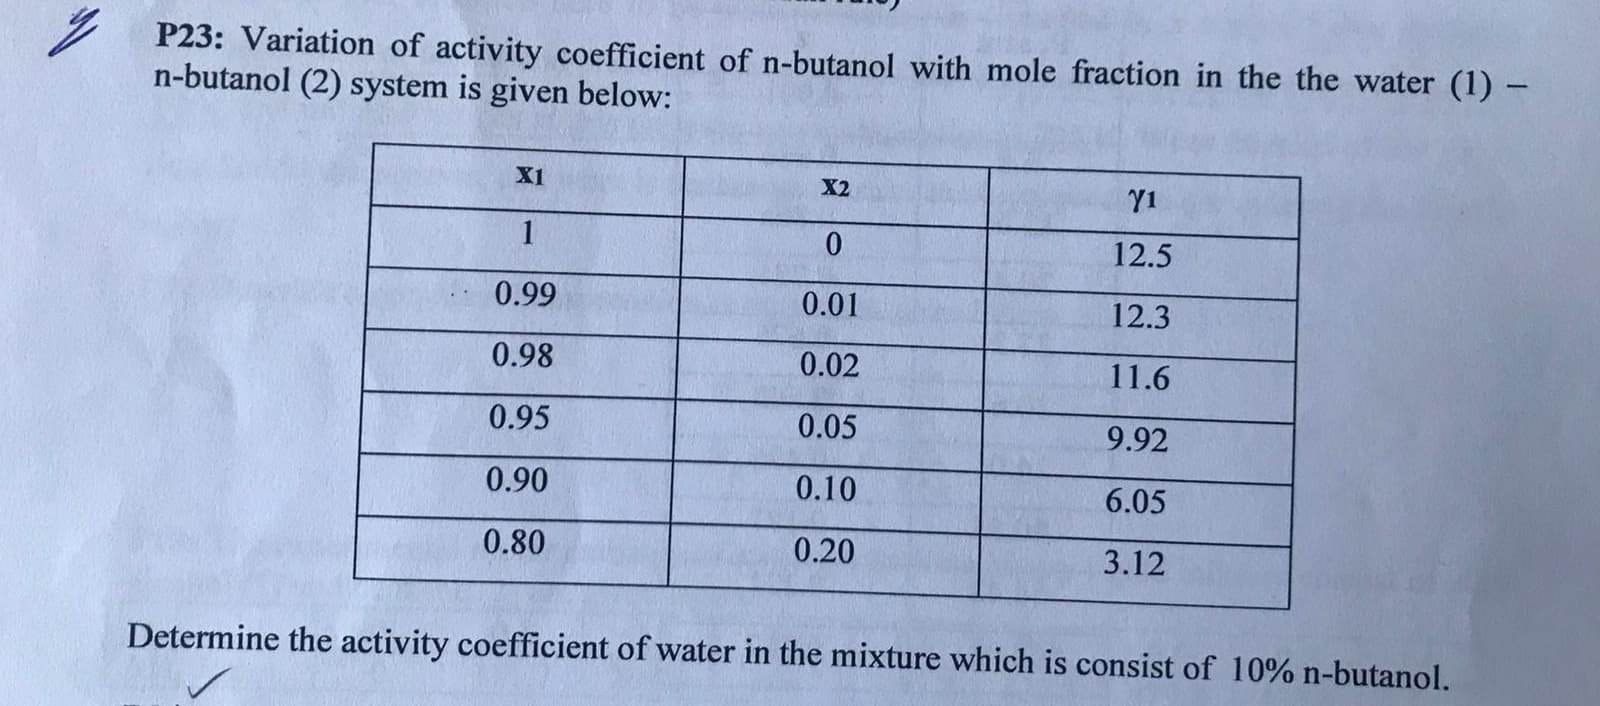 P23: Variation of activity coefficient of n-butanol with mole fraction in the the water (1) -
n-butanol (2) system is given below:
X1
X2
Y1
1
12.5
0.99
0.01
12.3
0.98
0.02
11.6
0.95
0.05
9.92
0.90
0.10
6.05
0.80
0.20
3.12
Determine the activity coefficient of water in the mixture which is consist of 10% n-butanol.
